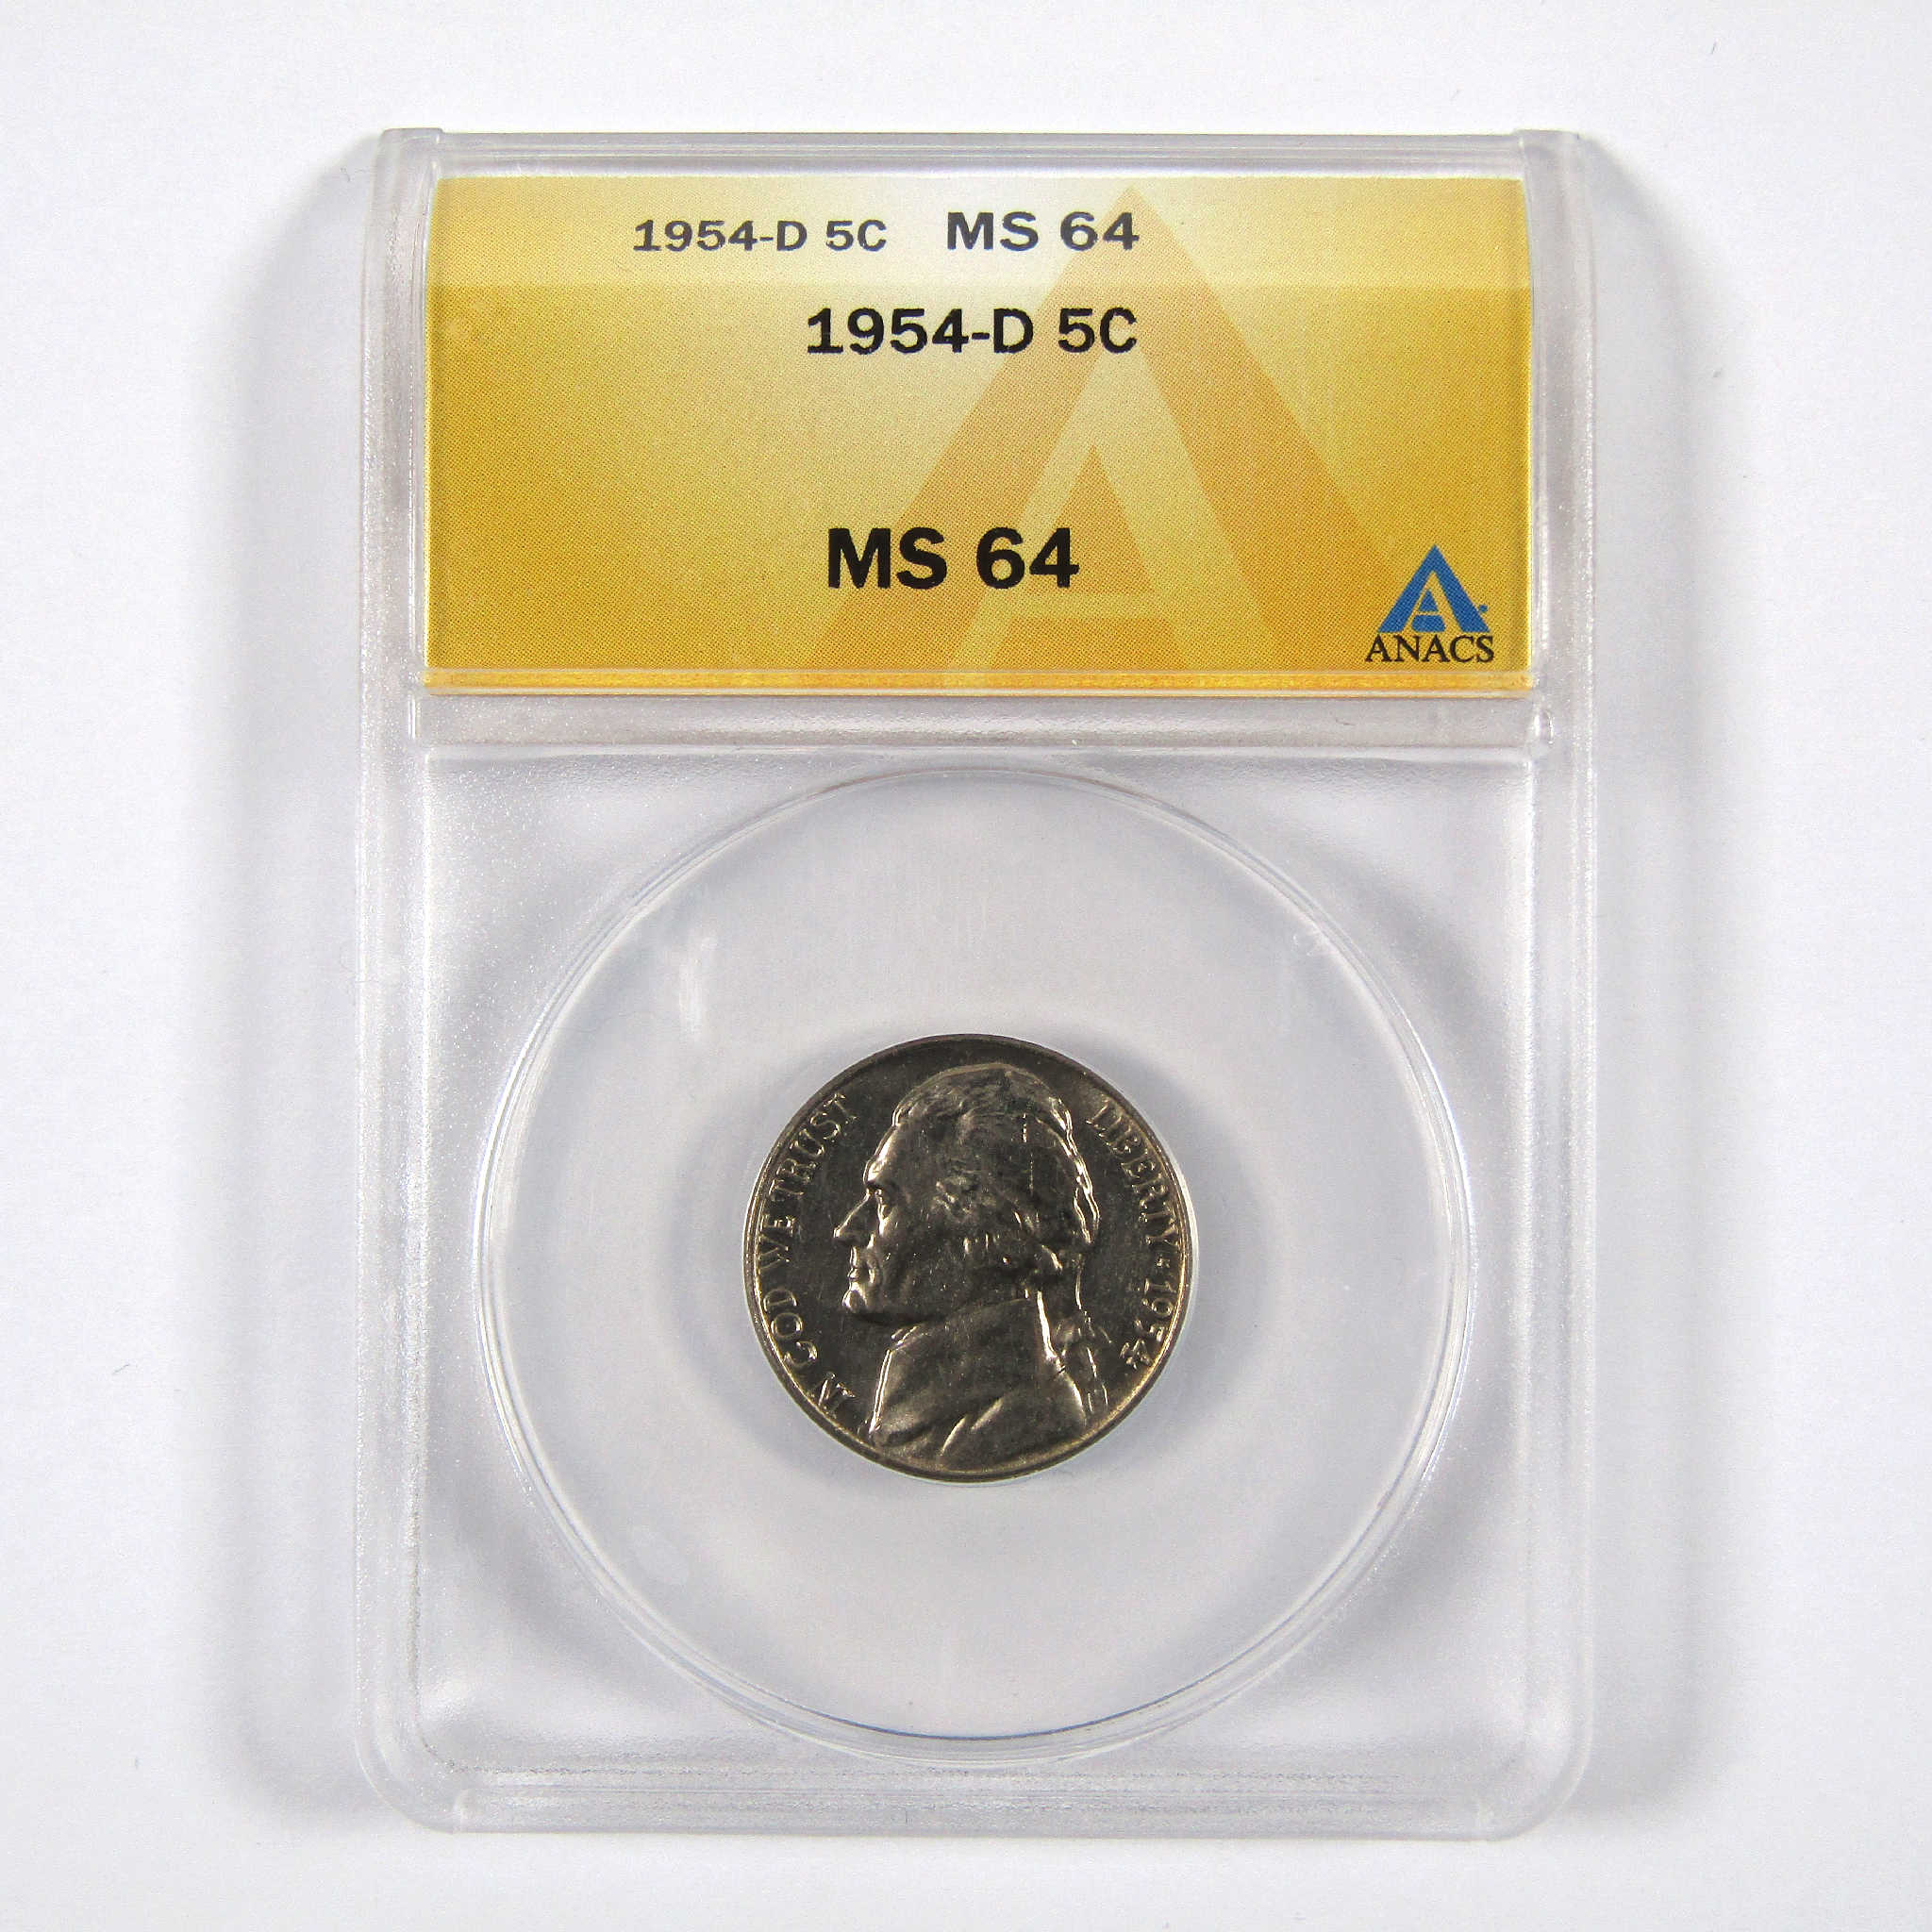 1954 D Jefferson Nickel MS 64 ANACS 5c Uncirculated Coin SKU:CPC4013